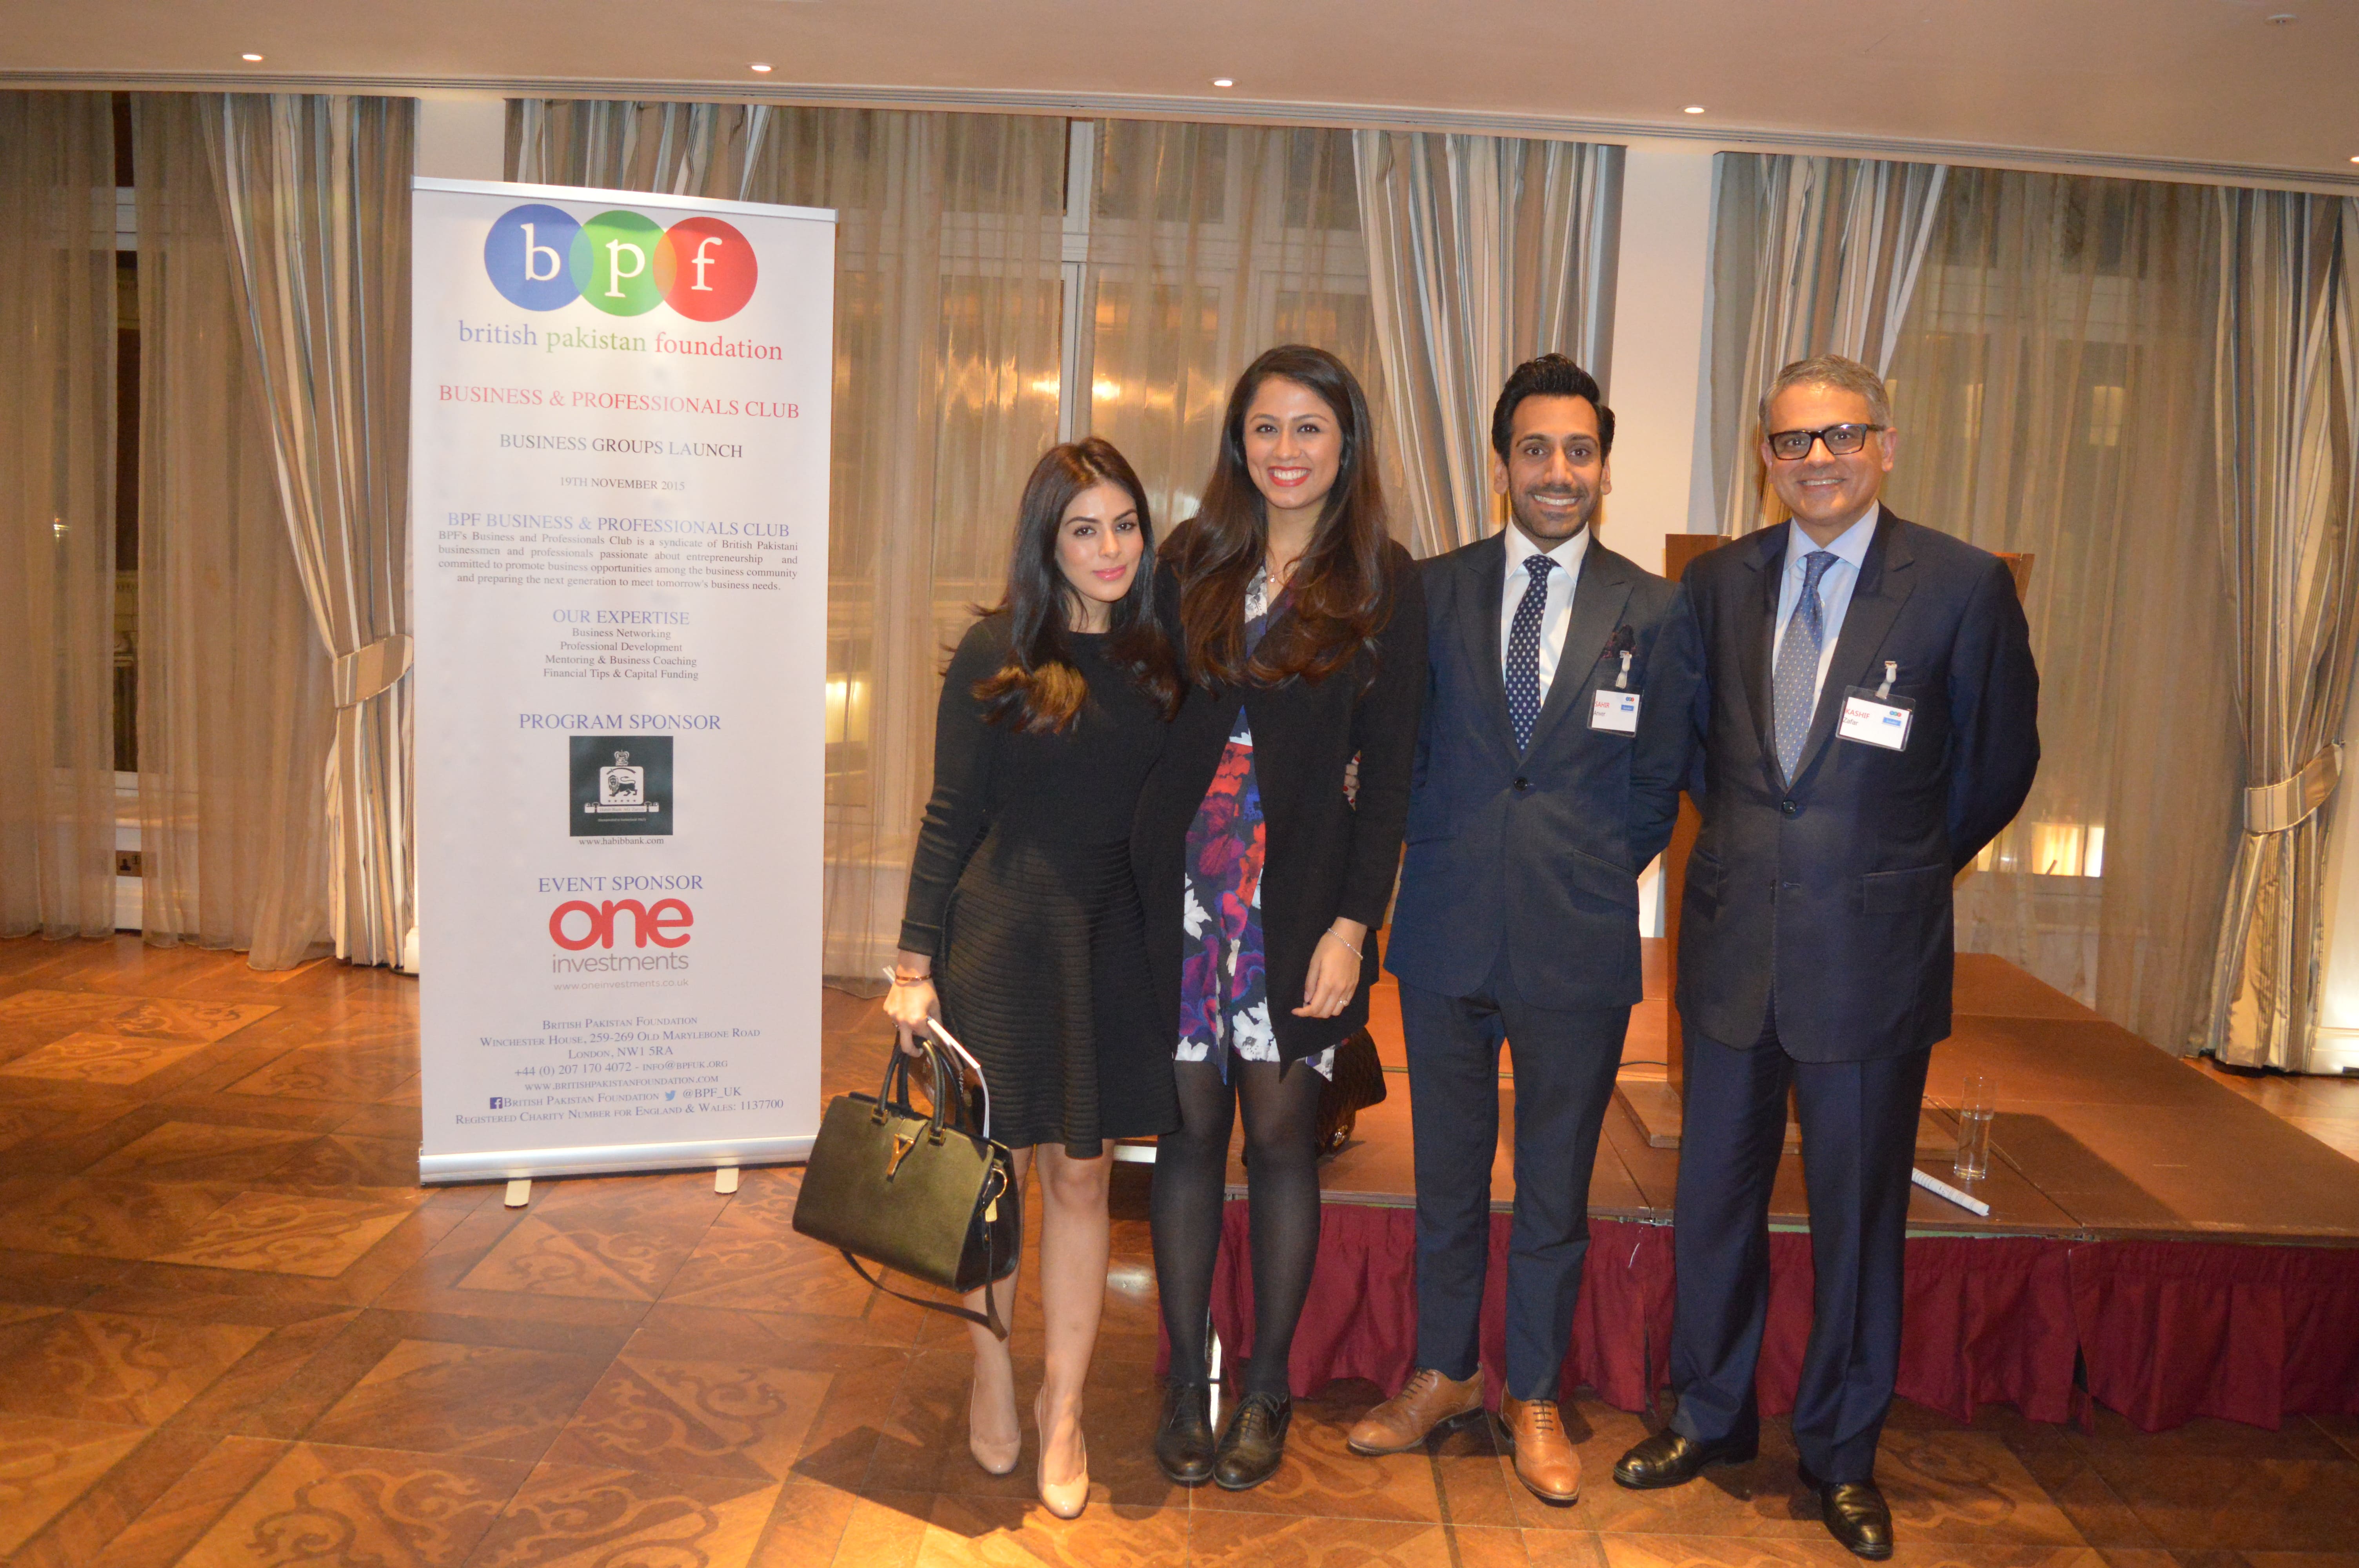 BPF Business and Professionals Club: Networking and Mentoring, London -  British Pakistan Foundation